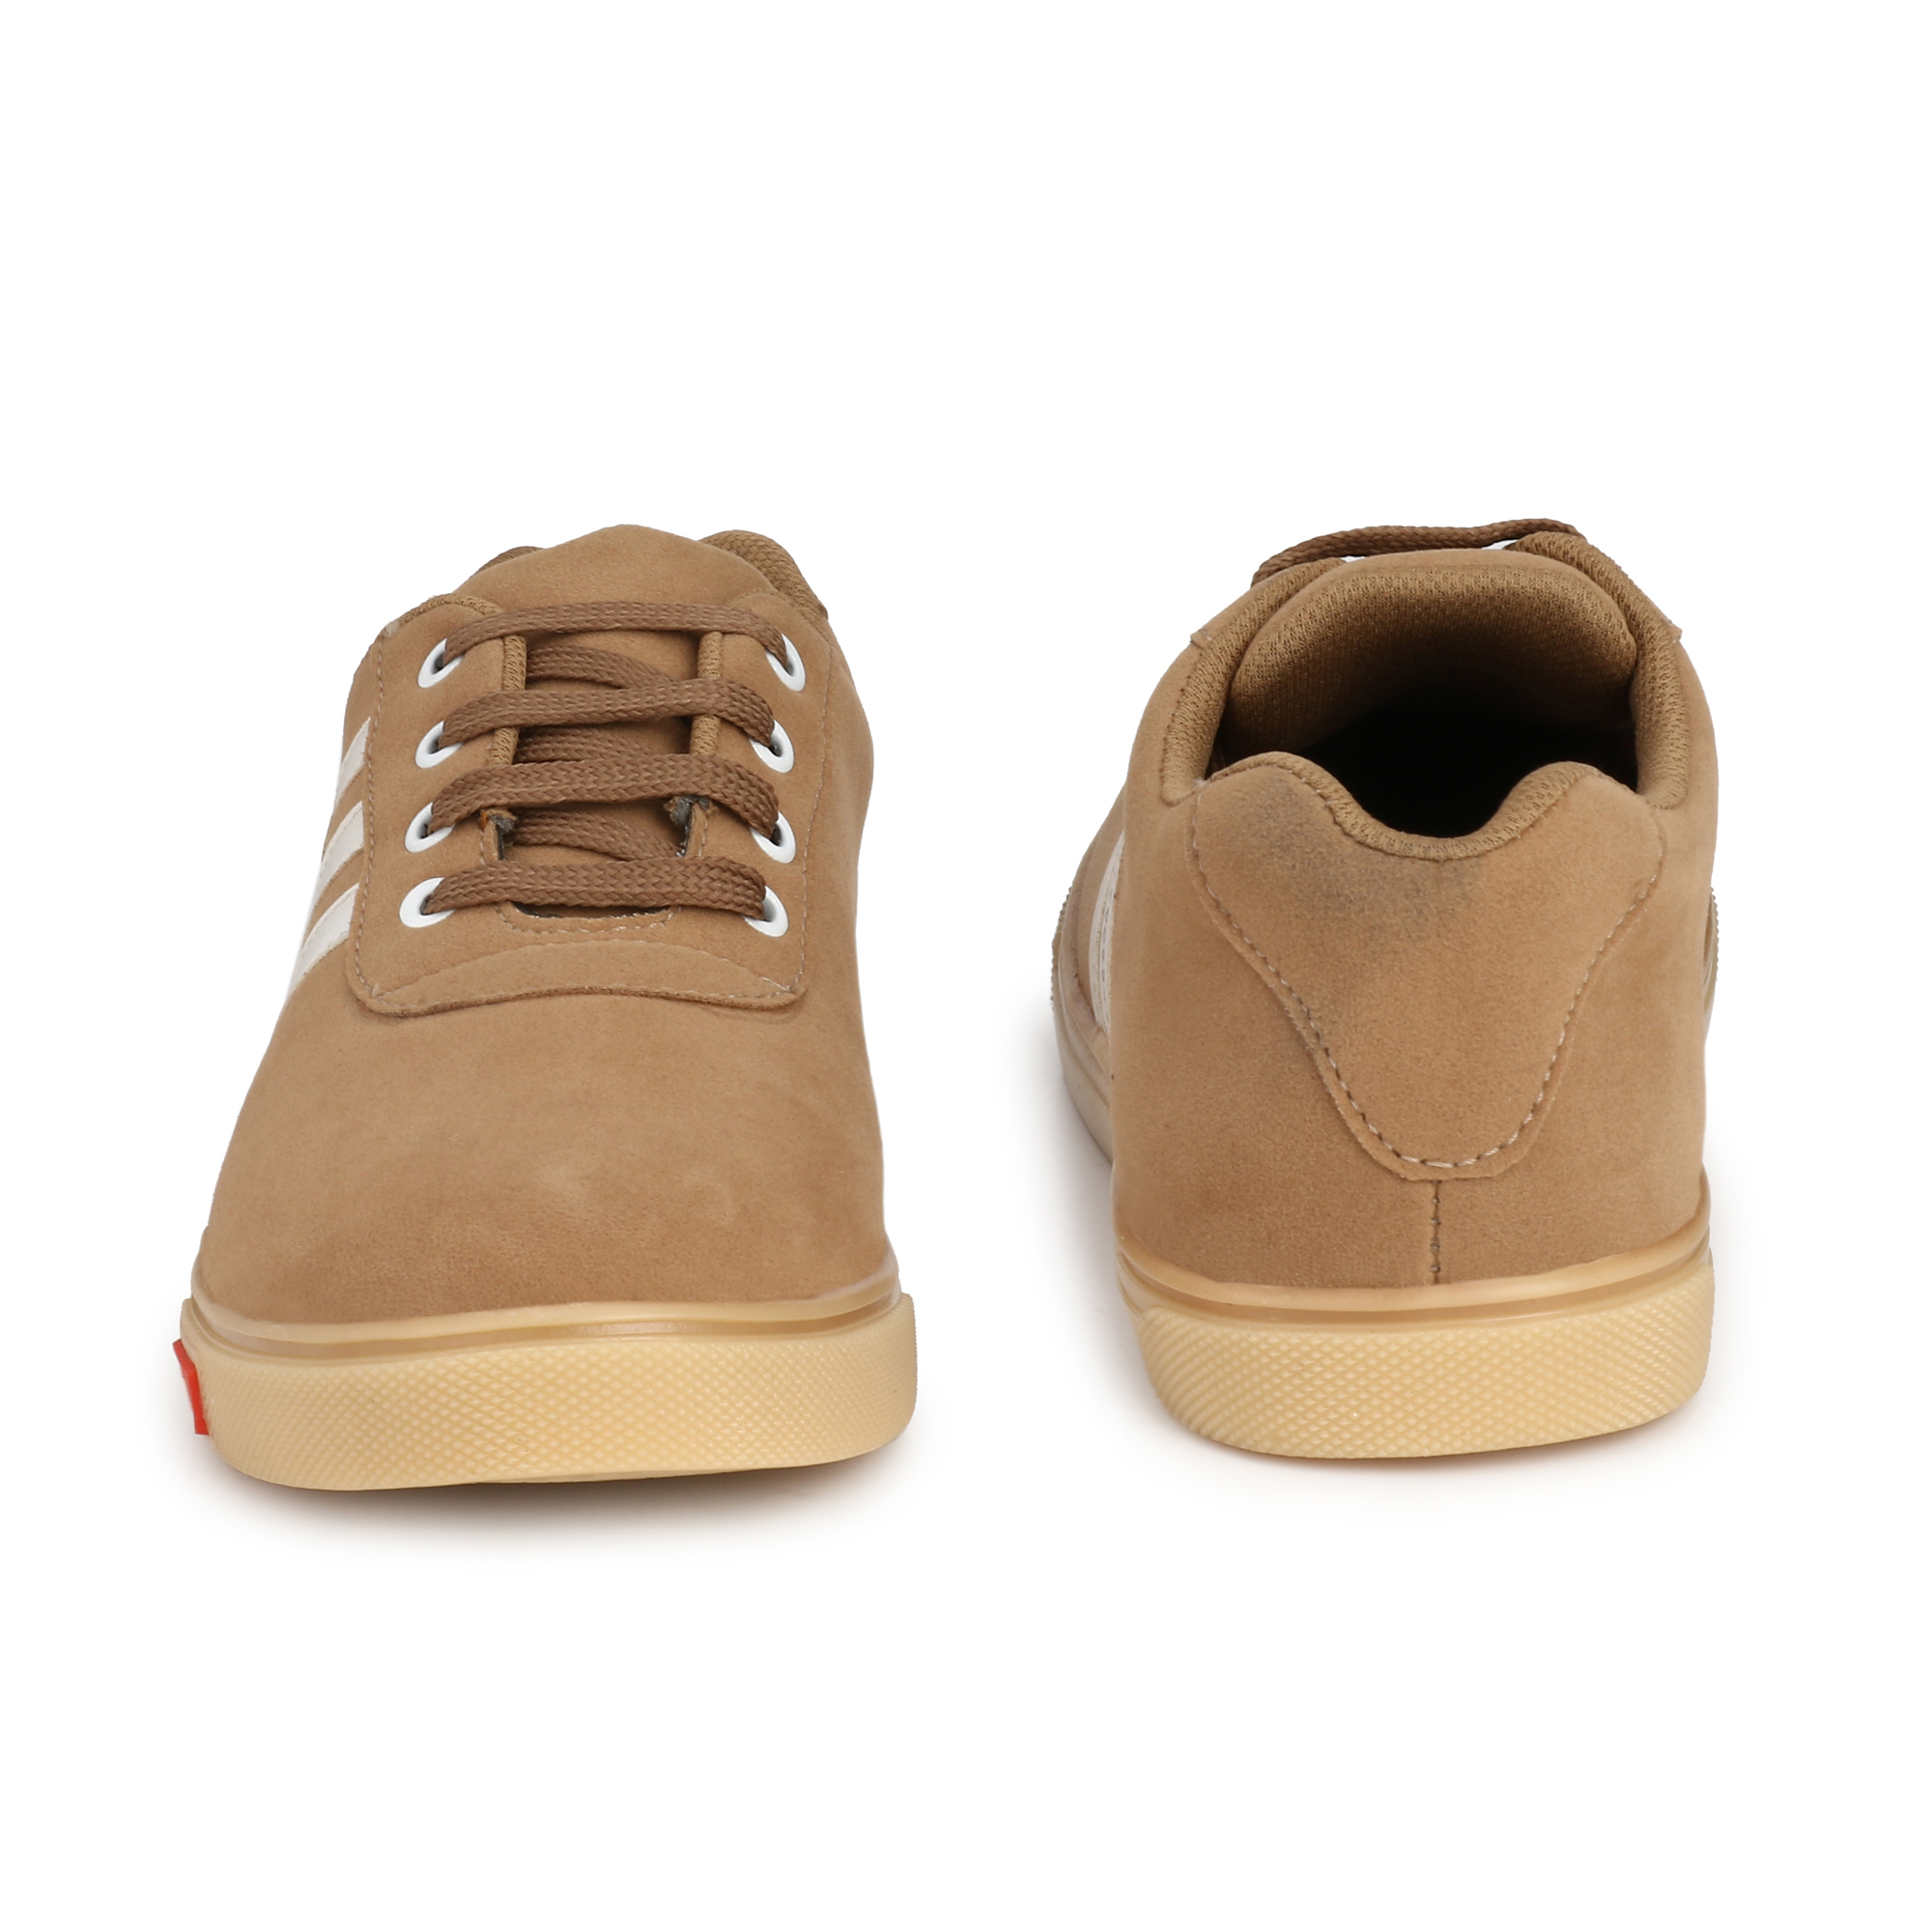 Buy 29K Men's Beige Suede Lace Up Casual Shoes Online @ ₹569 from ShopClues